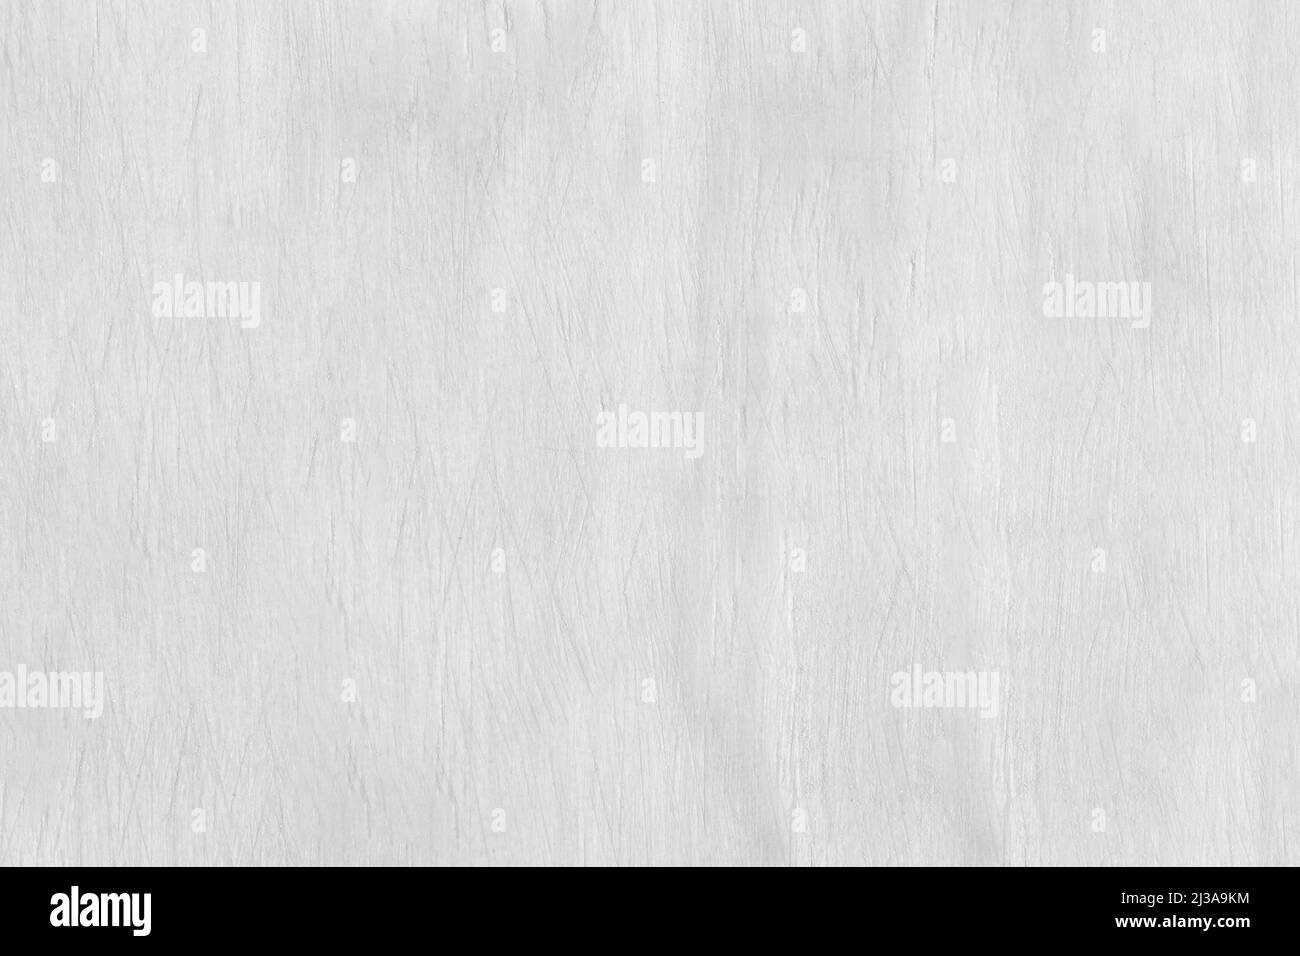 White wood texture background, White planks for design in your work. Stock Photo